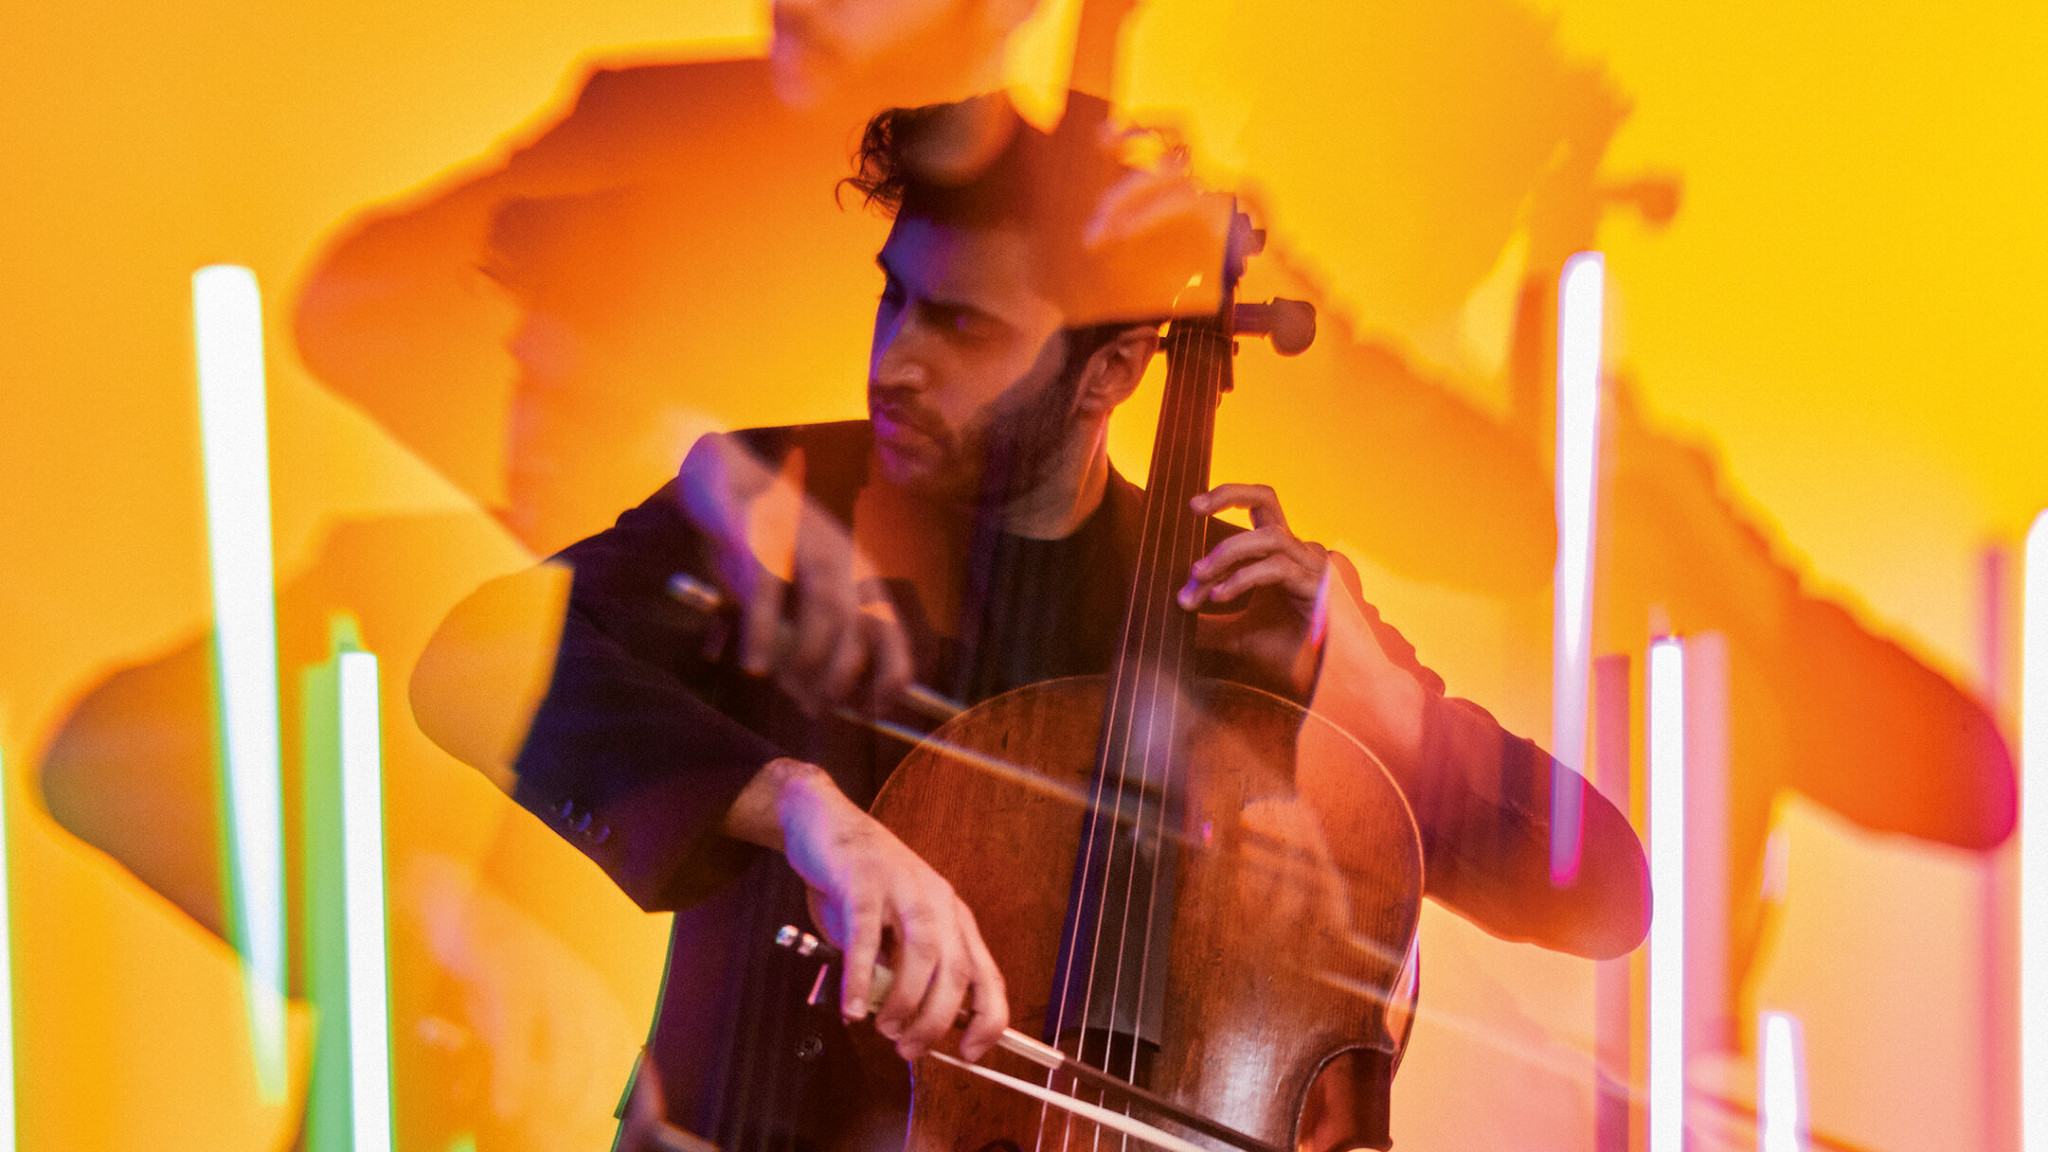 Kian Soltani Makes Movie Magic - 'Cello Unlimited' Out Now!